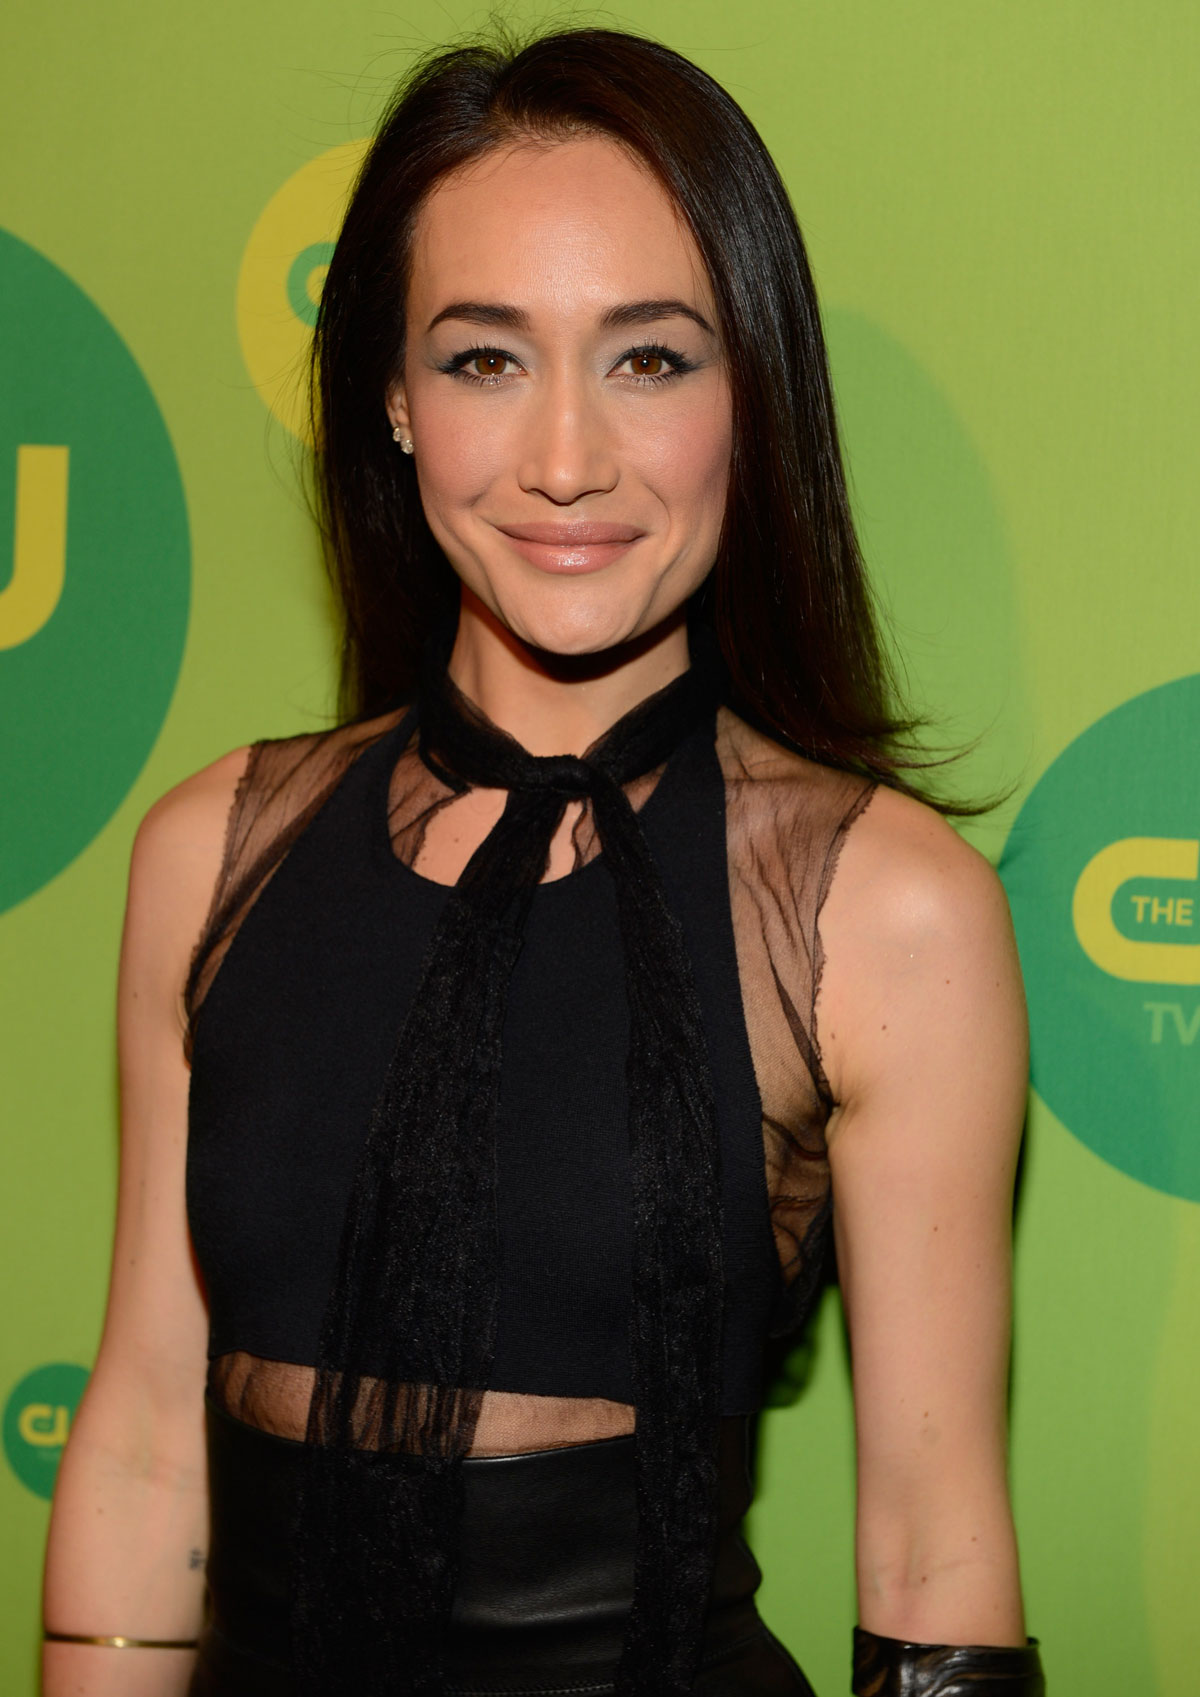 Maggie Q attends The CW Network’s New York 2013 Upfront